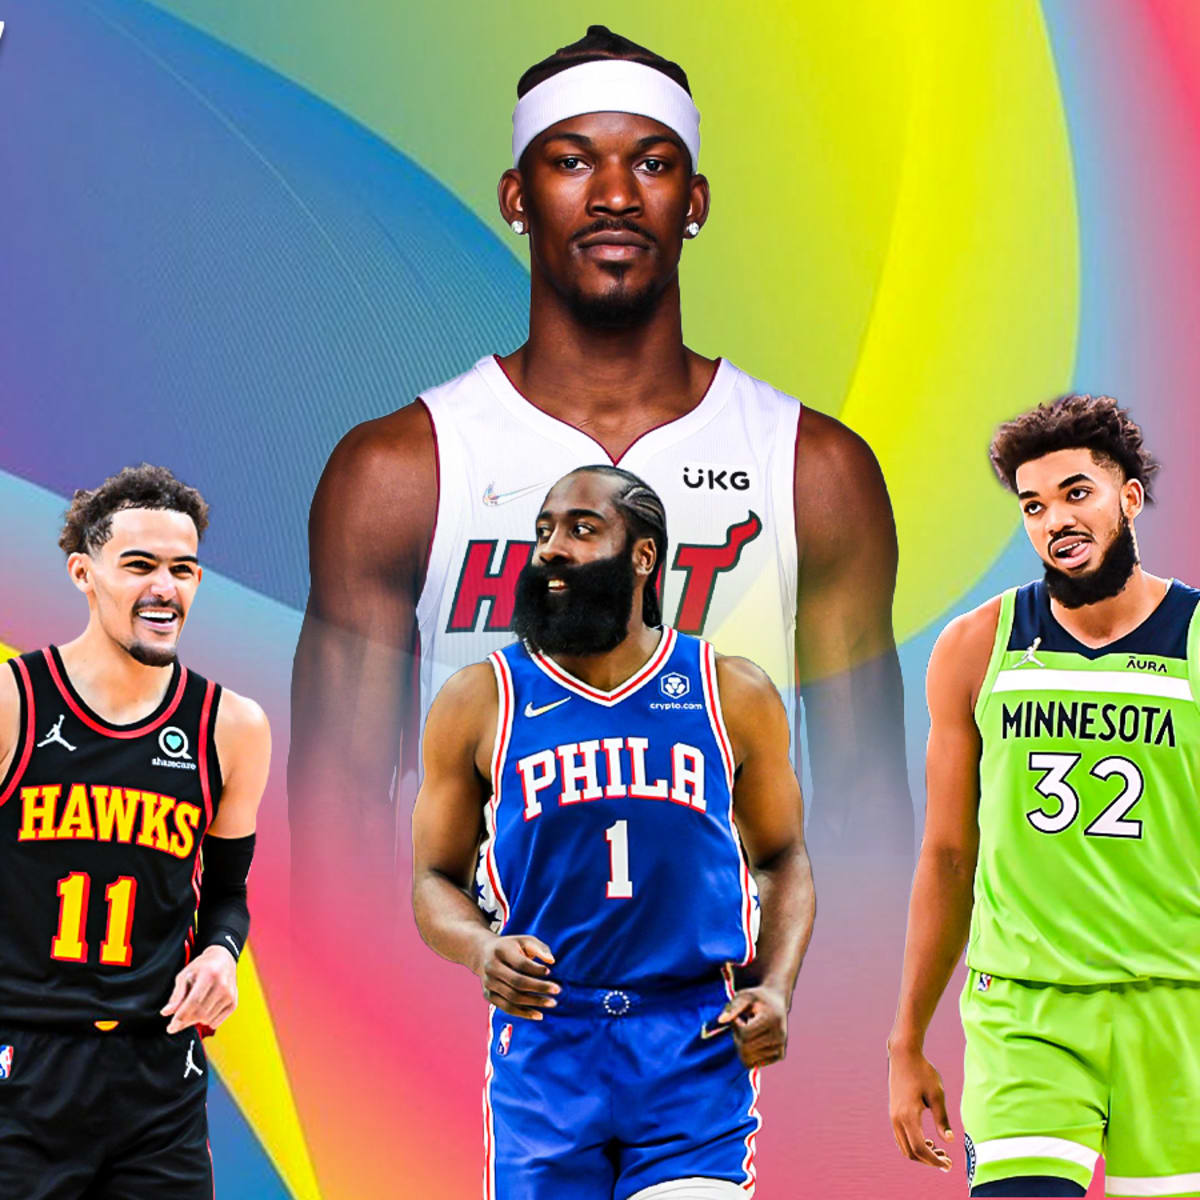 Anthony joins a roster of athlete endorsers that includes Bronny James, Ja  Morant, Trae Young, Jimmy Butler, and Haley and Hannah Cavinde